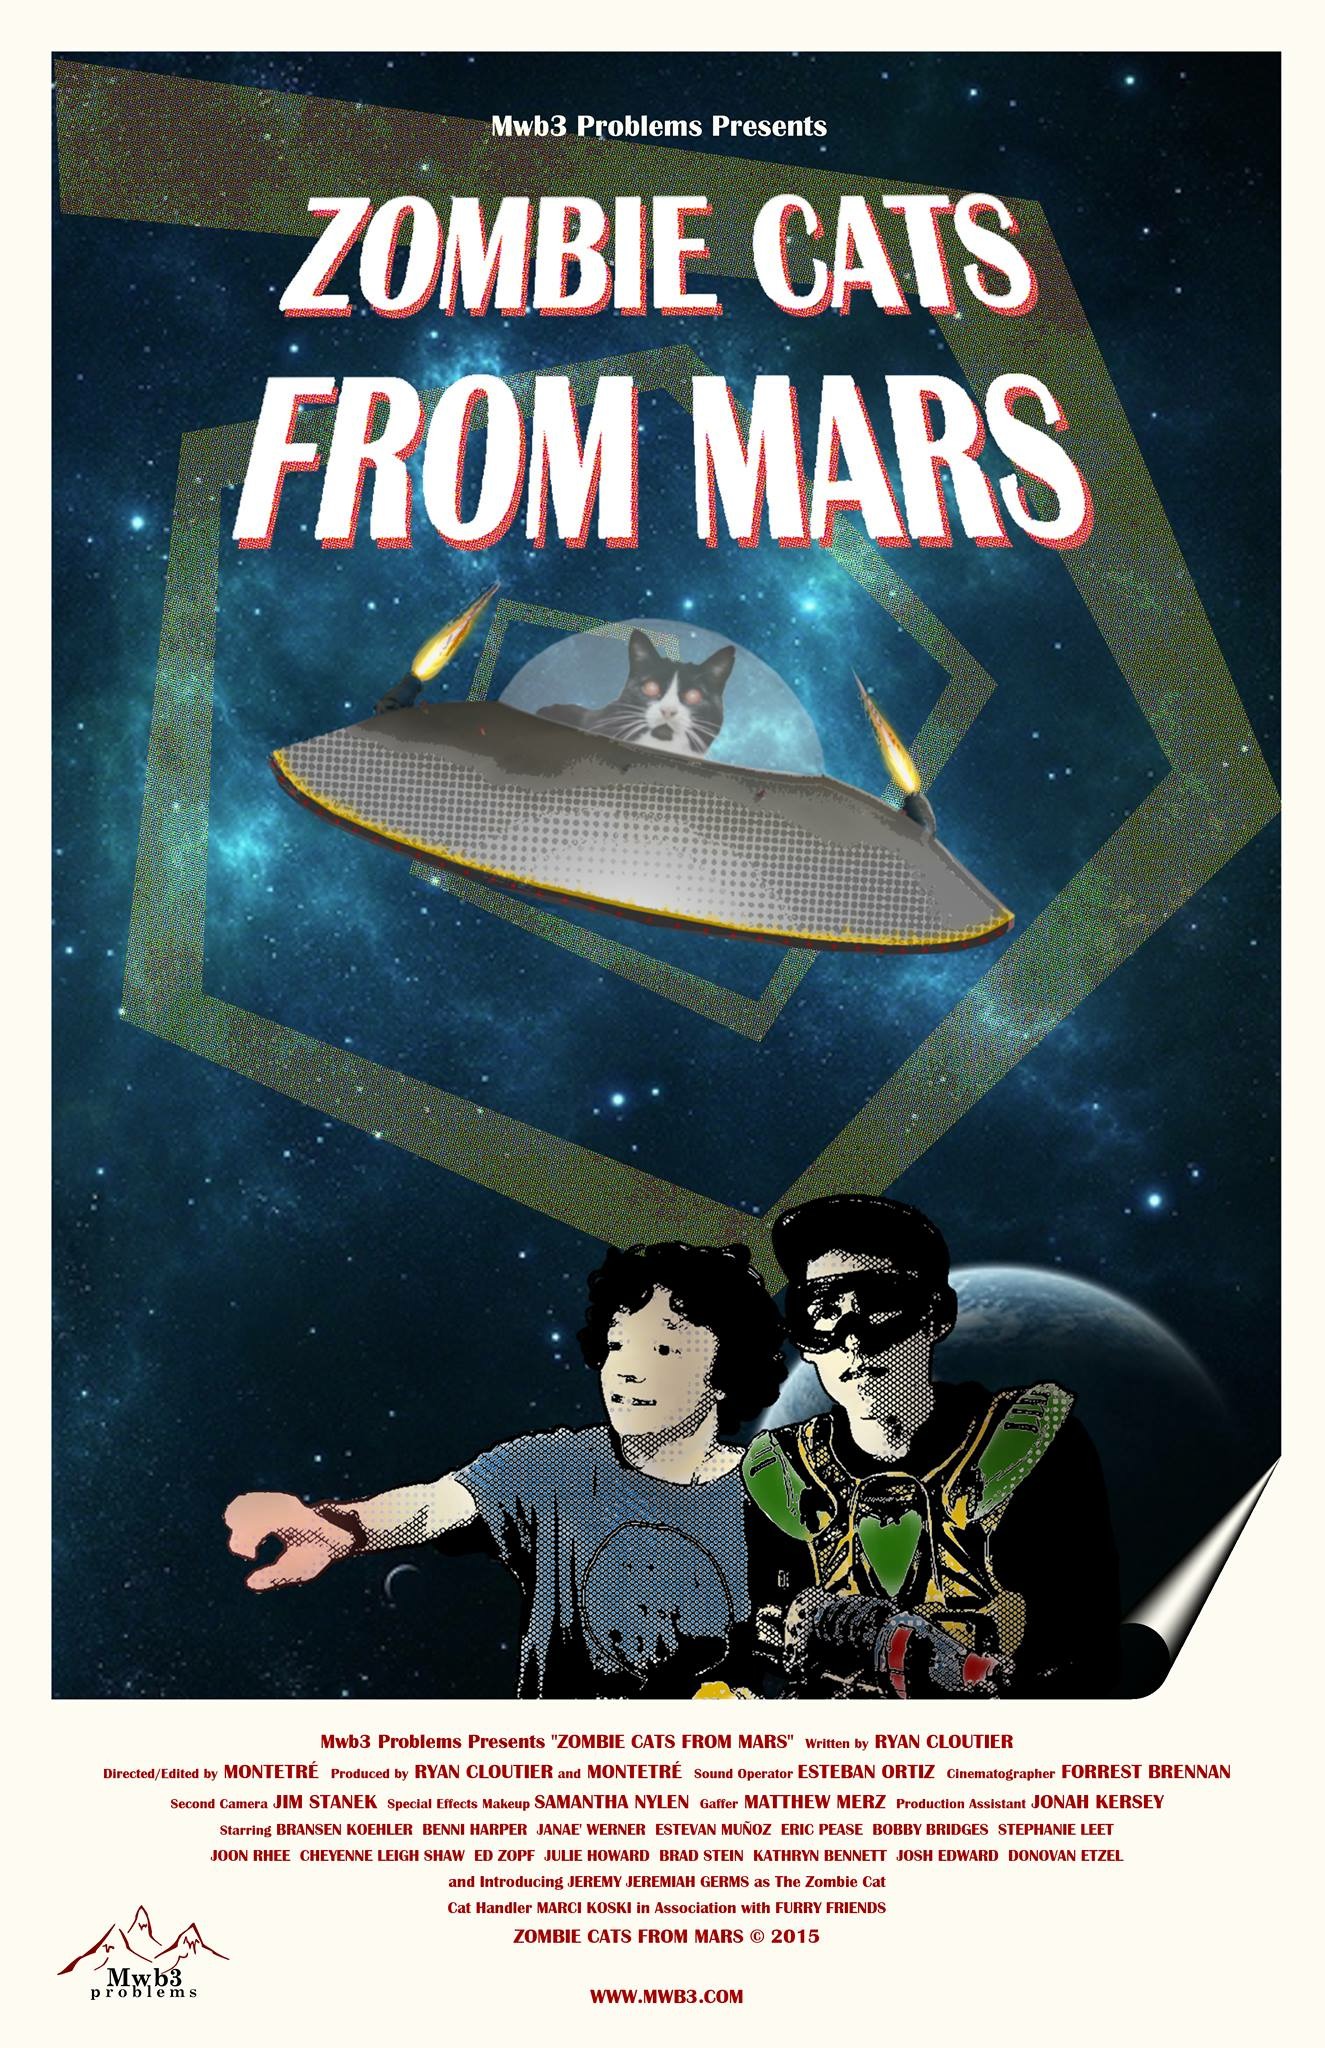 Movie poster, for the feature film made by MWB3 Problems. That was entitled Zombie Cats From Mars!